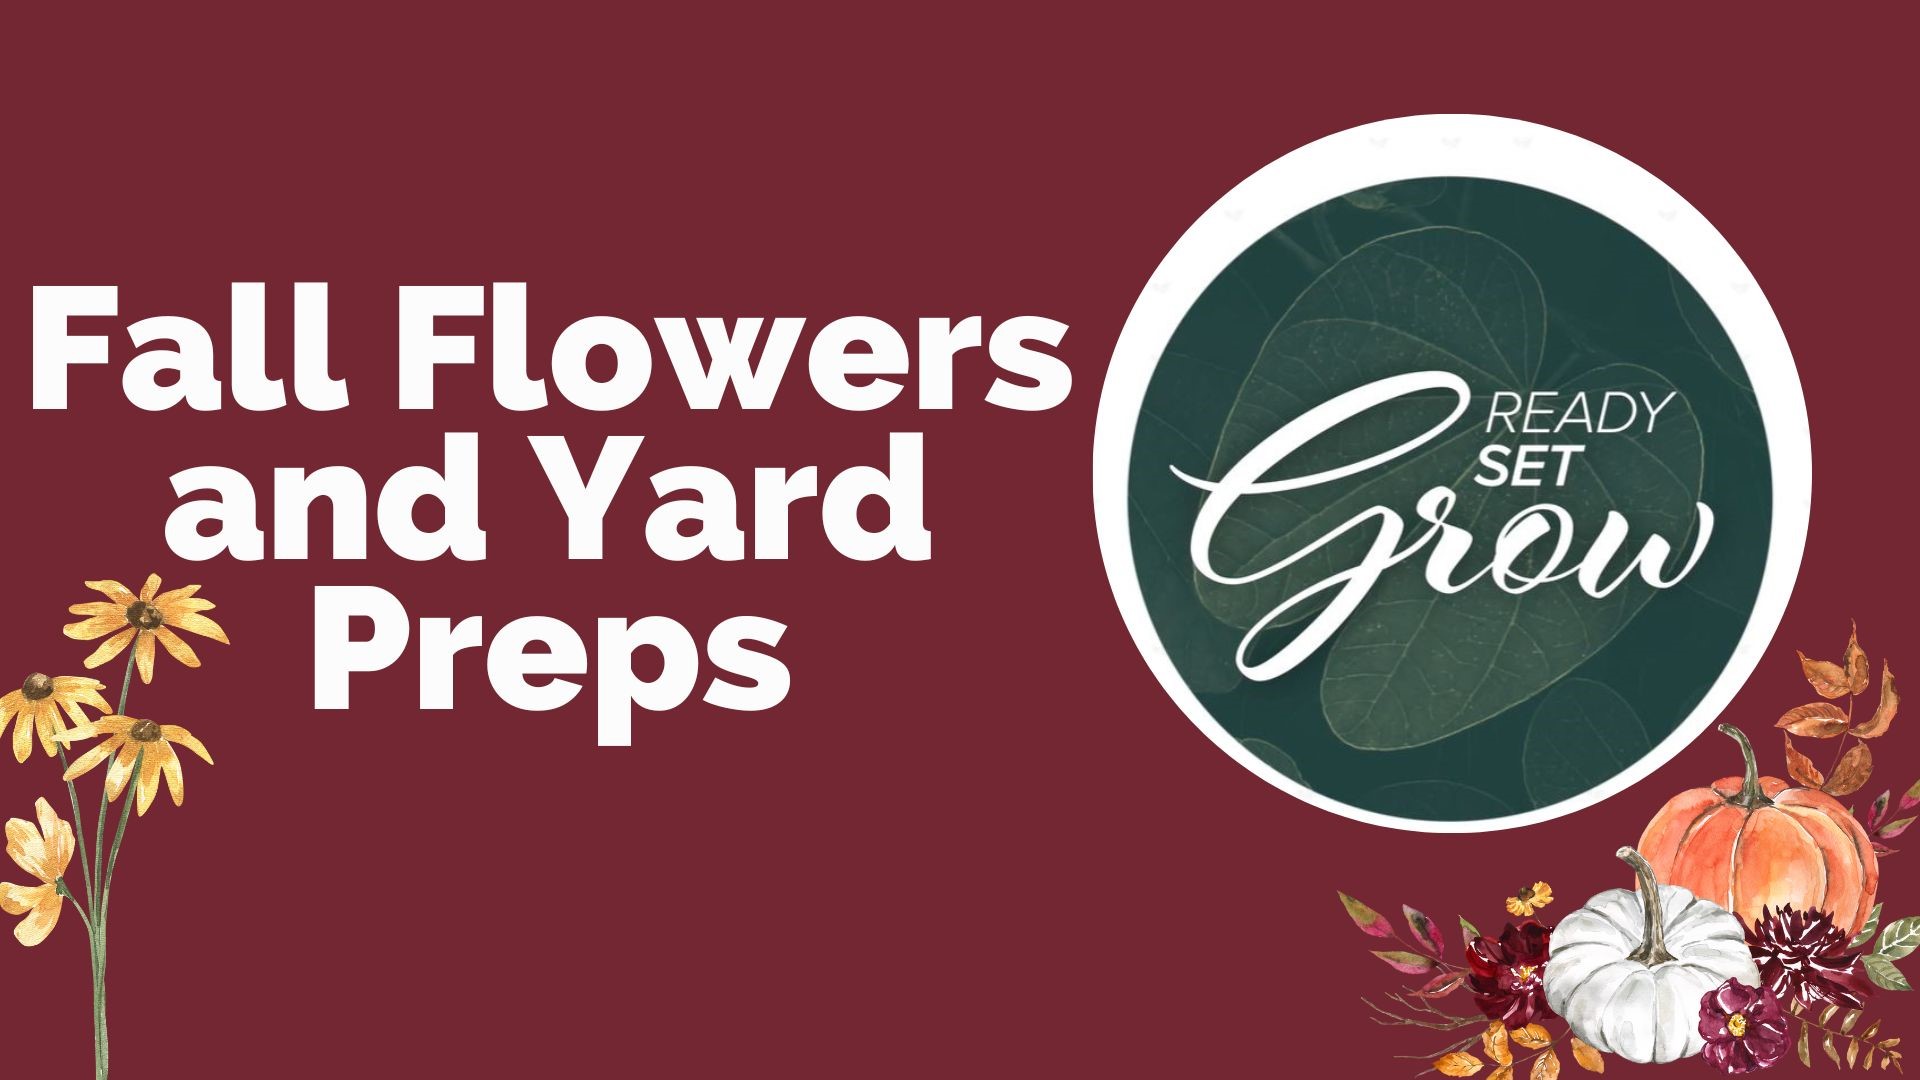 The fall season is almost officially here. What you can do now to get your yard ready for winter and beyond, plus the fall flowers available right now.